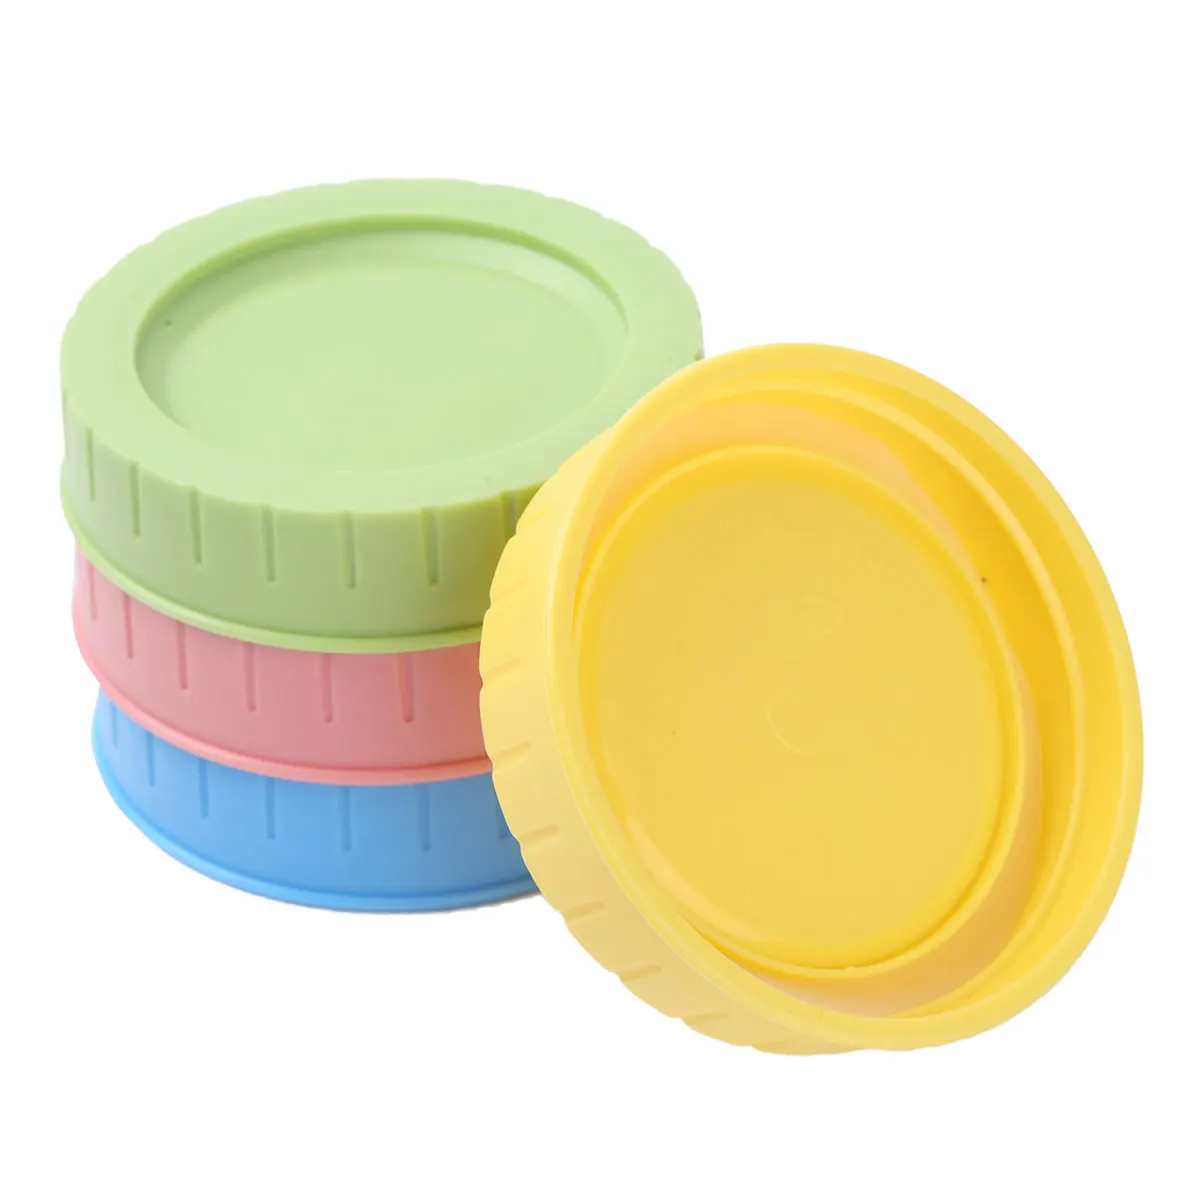 

Assorted Color 70mm/86mm Inner Diameter Leakproof Replacement Caps Lids with Sealing O-Ring for Mason Jars Canning Drinking Jars